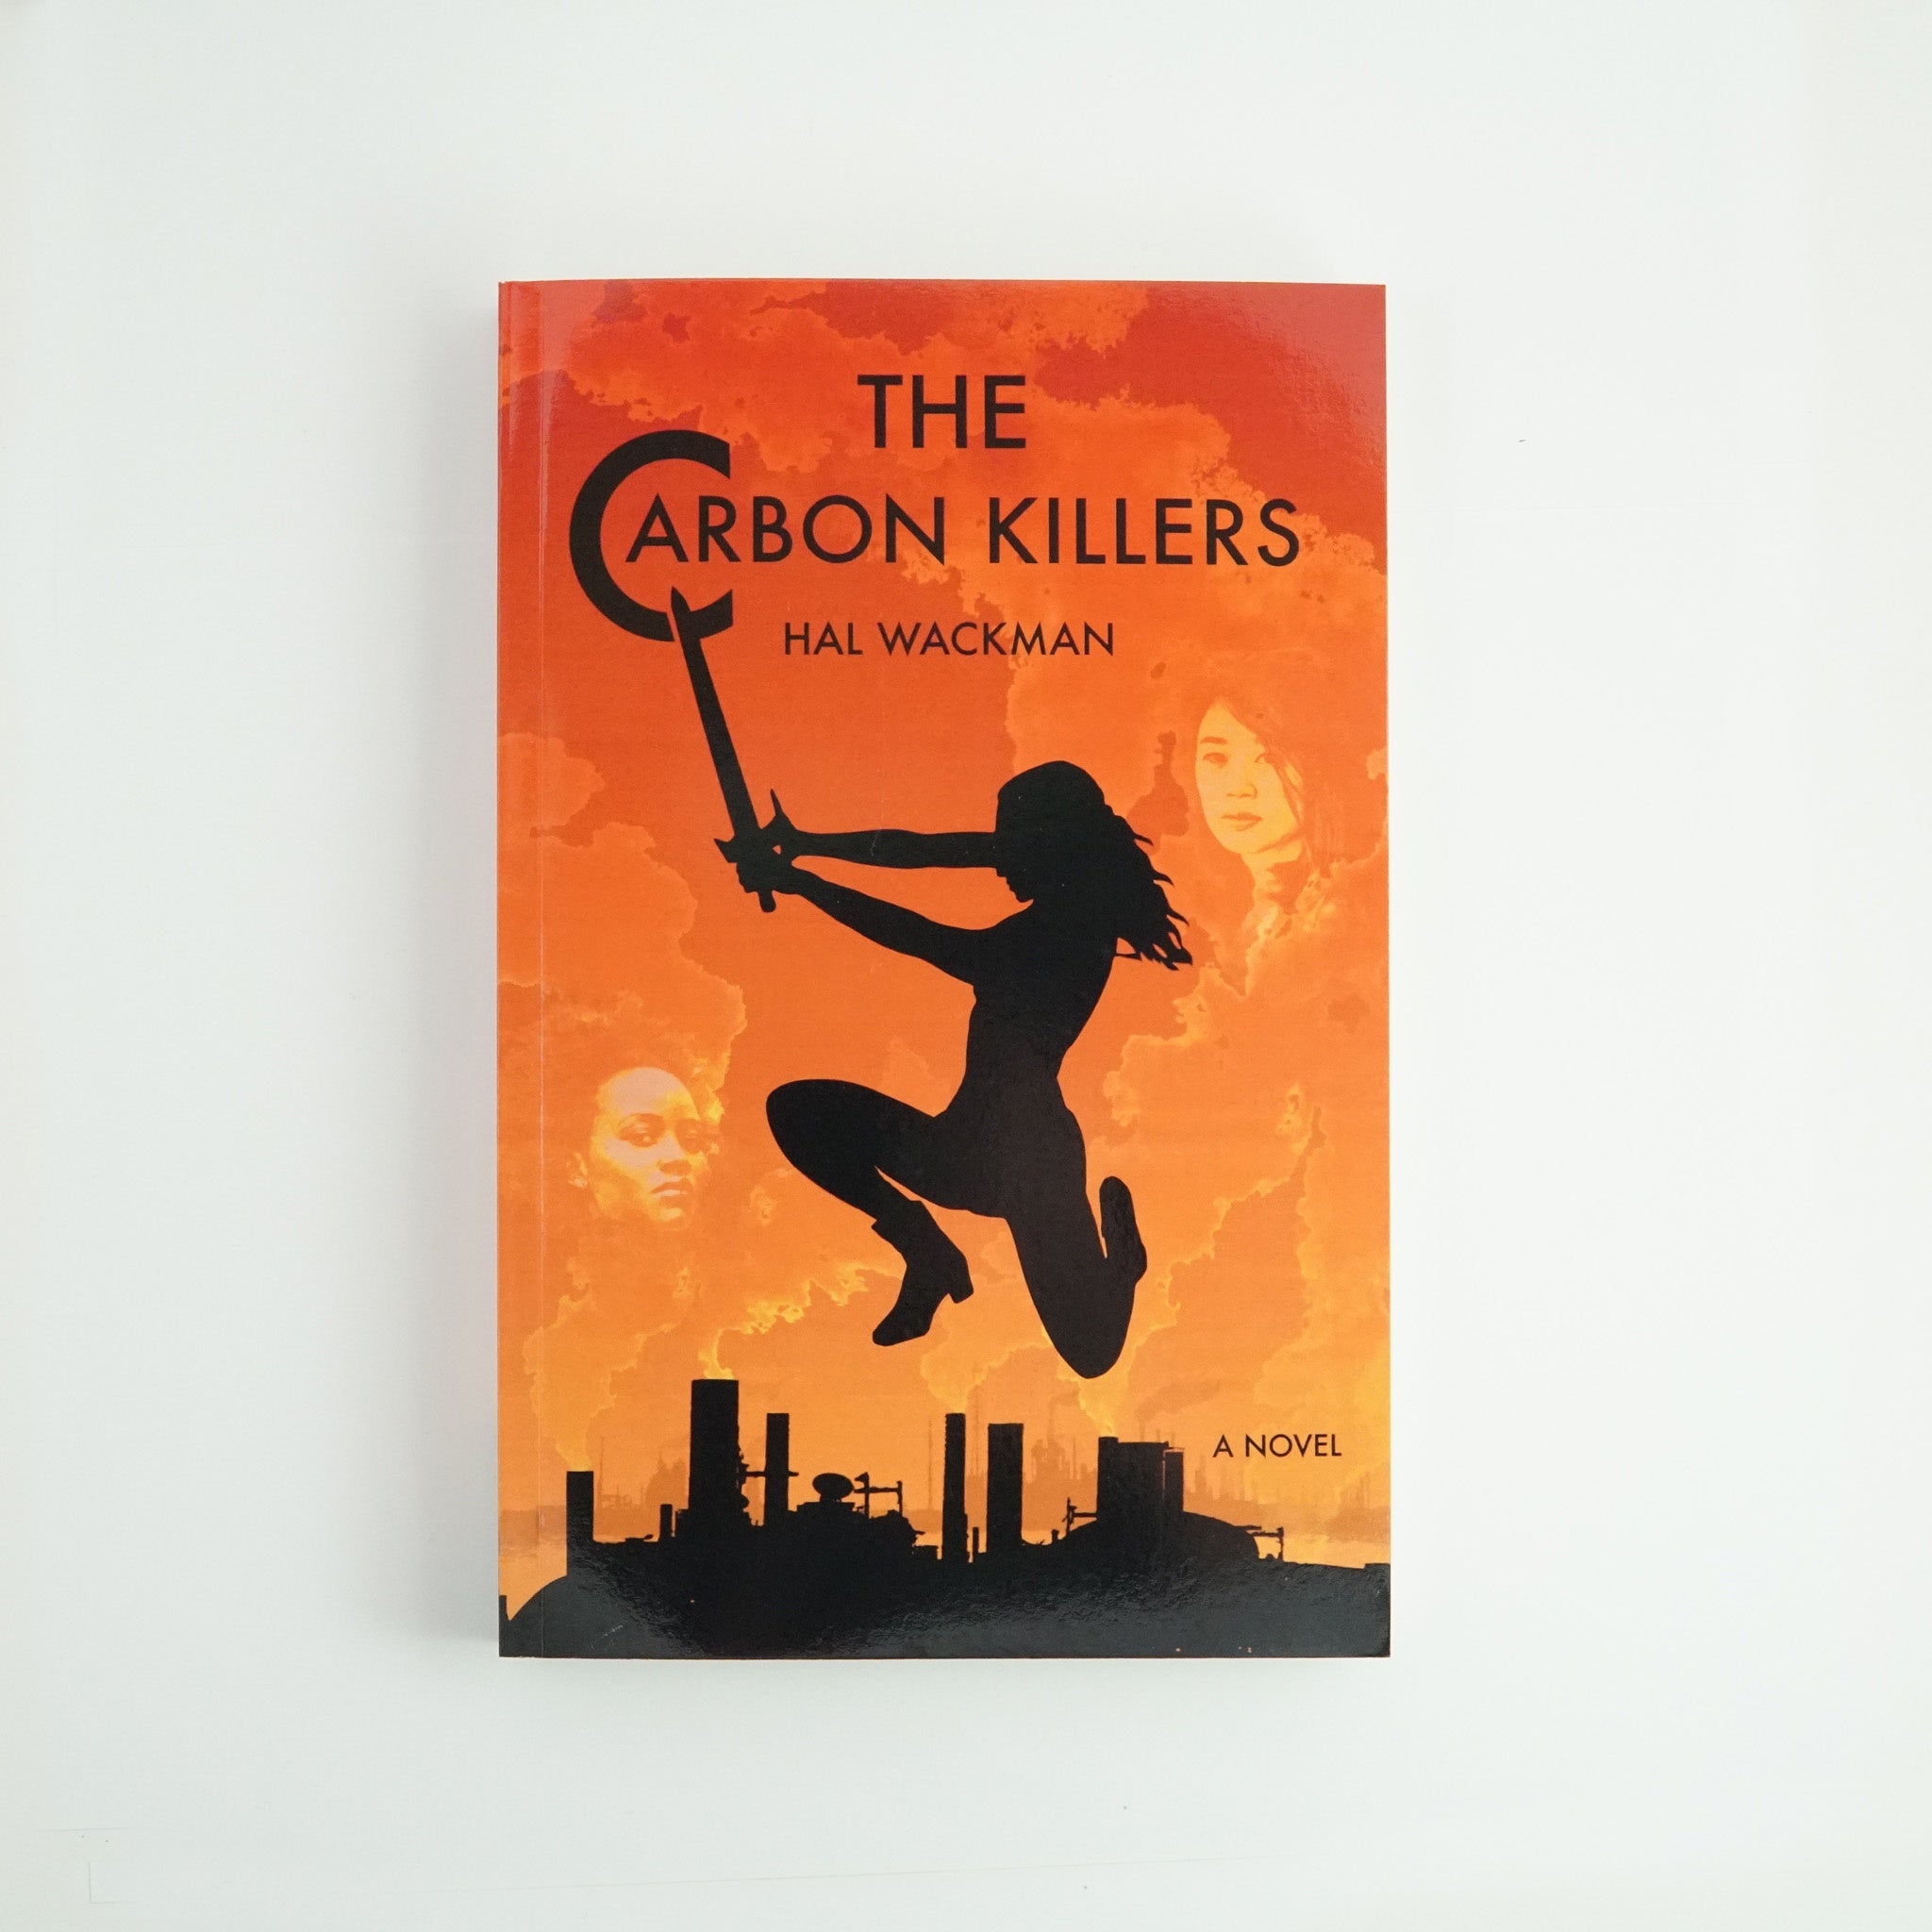 The Carbon Killers by Hal Wackman